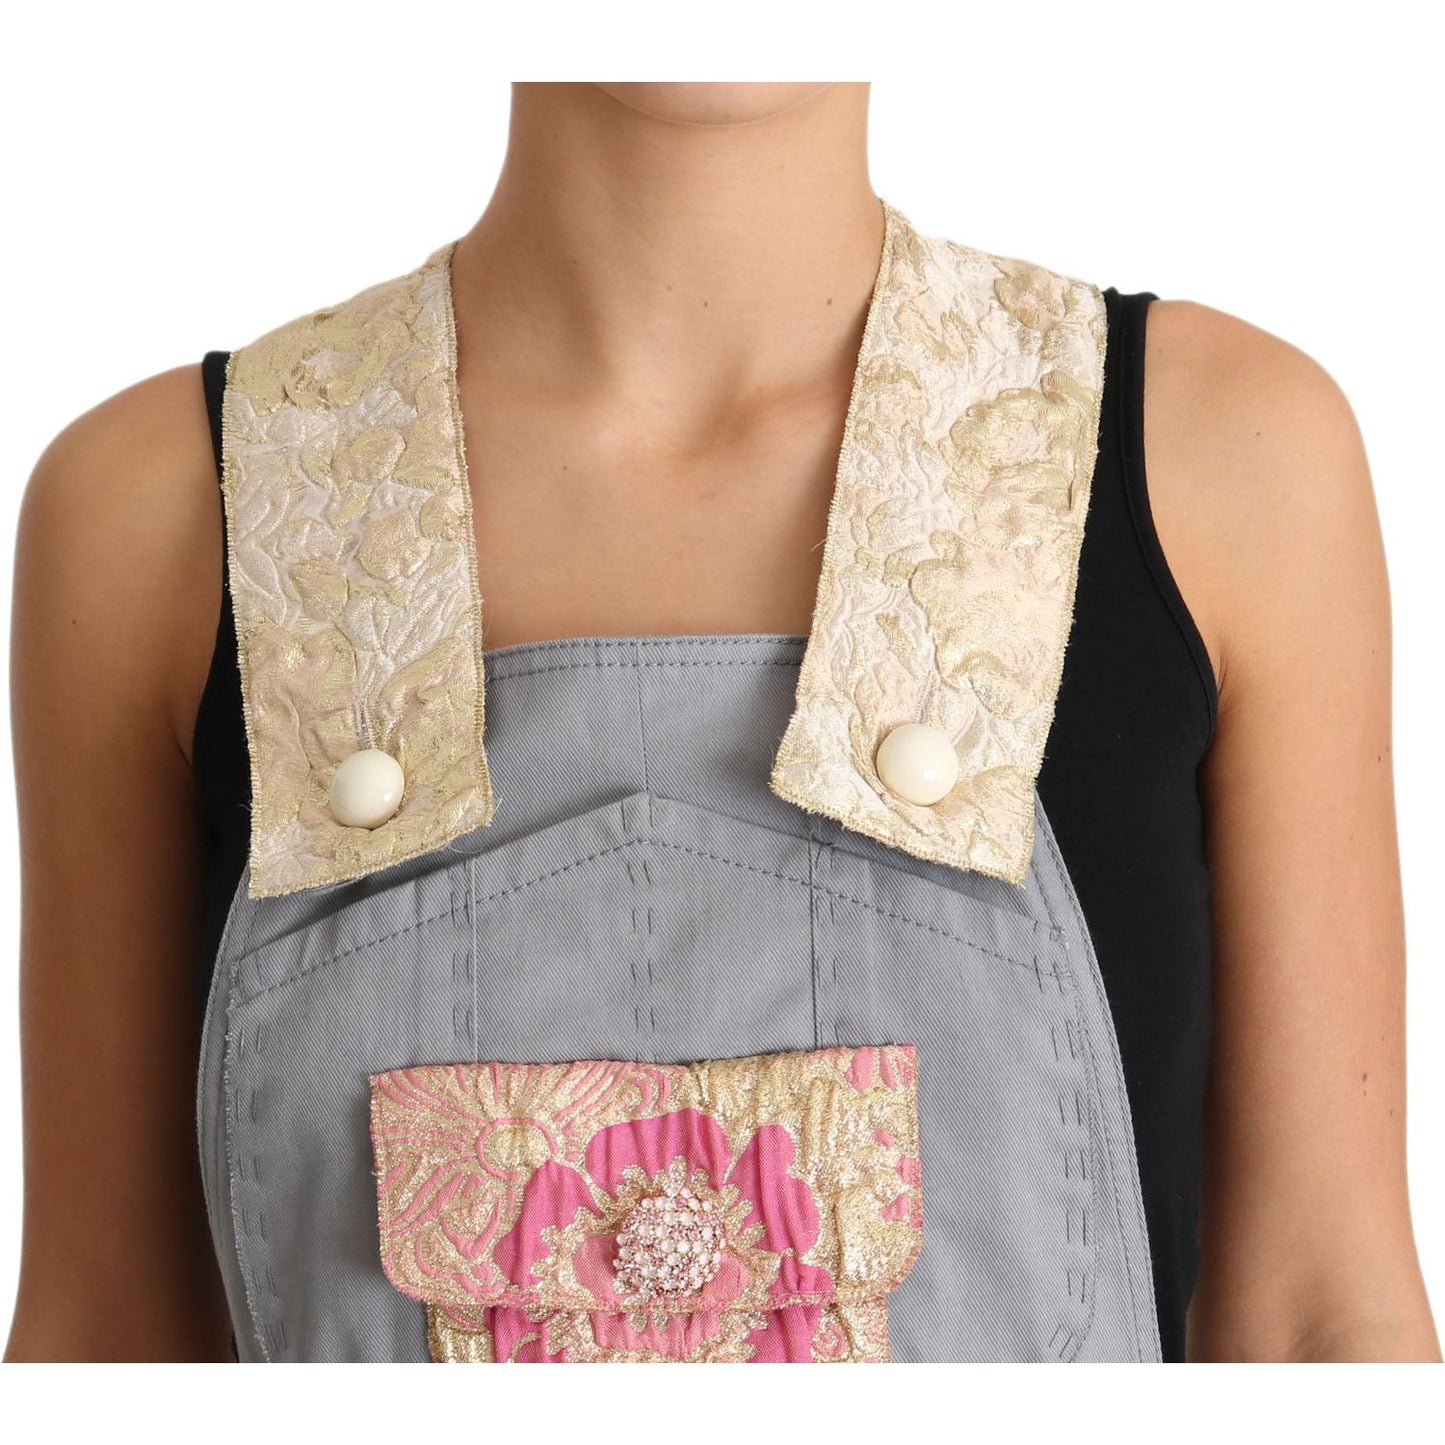 Dolce & Gabbana Exquisite Floral Embellished Denim Overalls gray-overall-jeans-gray-denim-crystal-hortensia